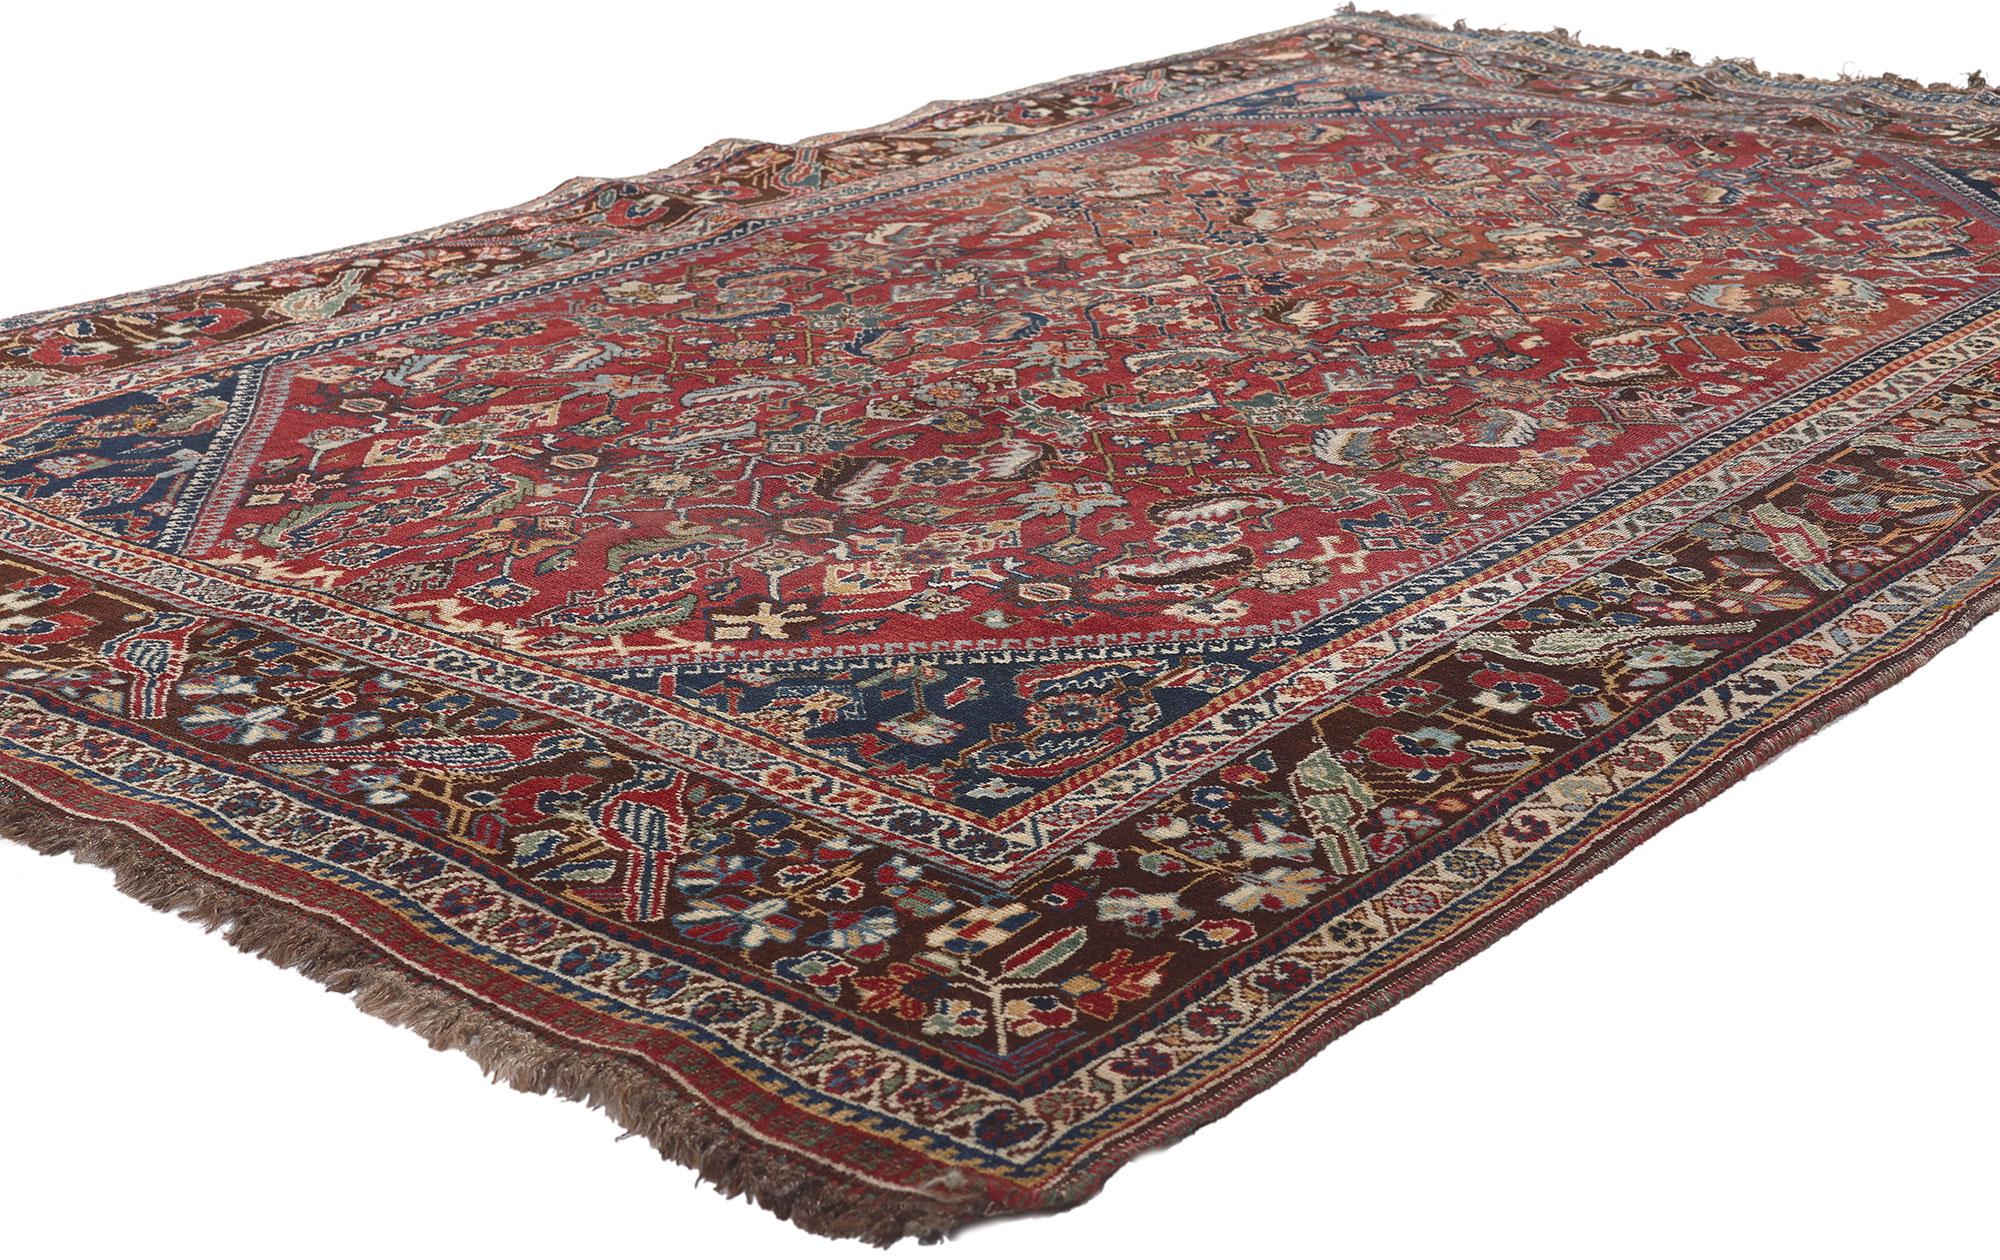 78566 Antique Persian Shiraz Rug, 04'07 x 07'03.
Emanating traditional sensibility and timeless style with incredible detail and texture, this antique Persian Shiraz rug is a captivating vision of woven beauty. The meticulous Herati design and